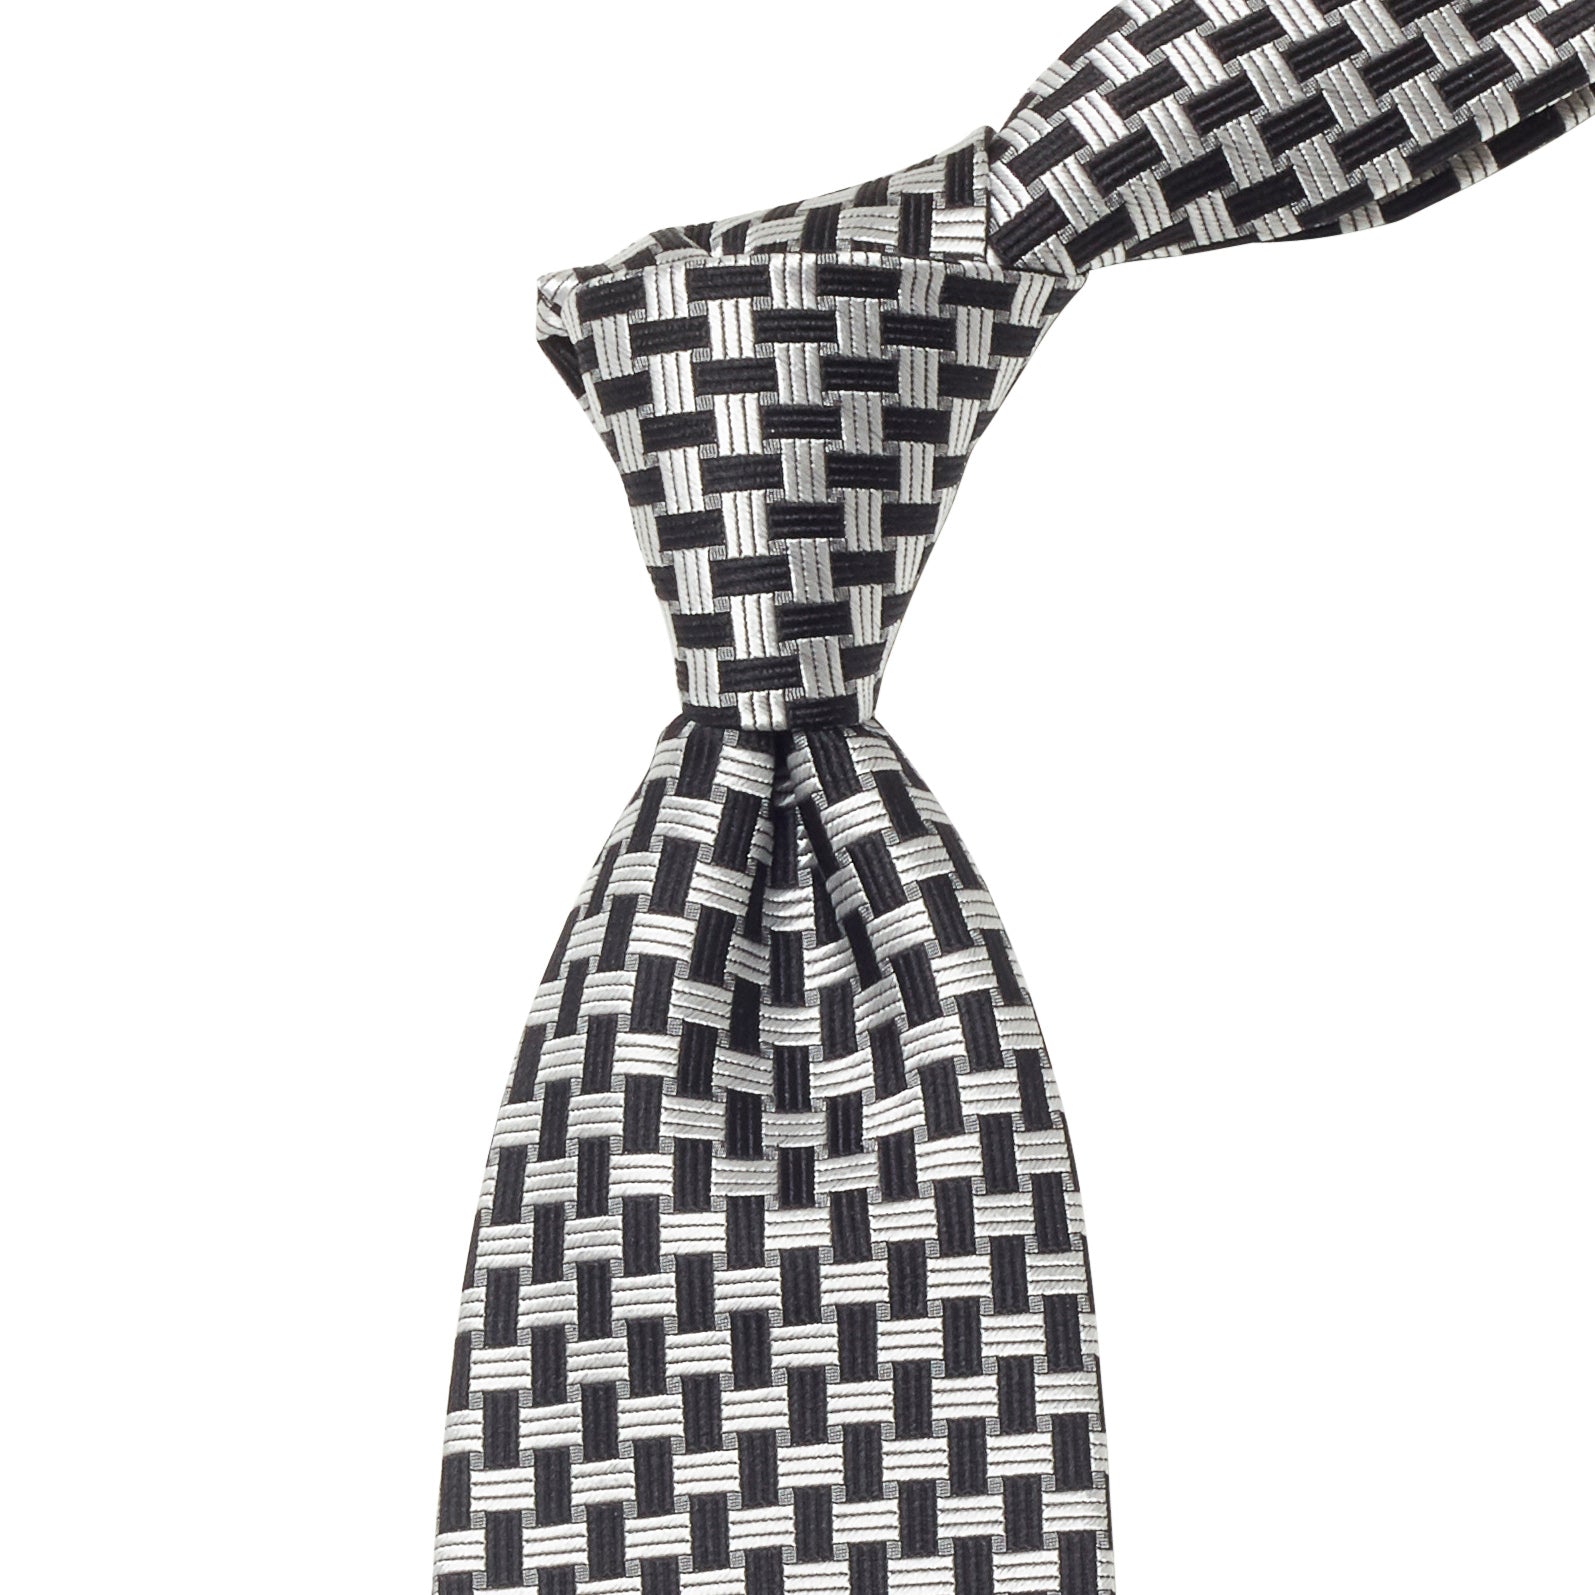 A high-quality, handmade Kirby Allison.com Sovereign Grade Basket Weave Silk Tie from the United Kingdom, in black and white.